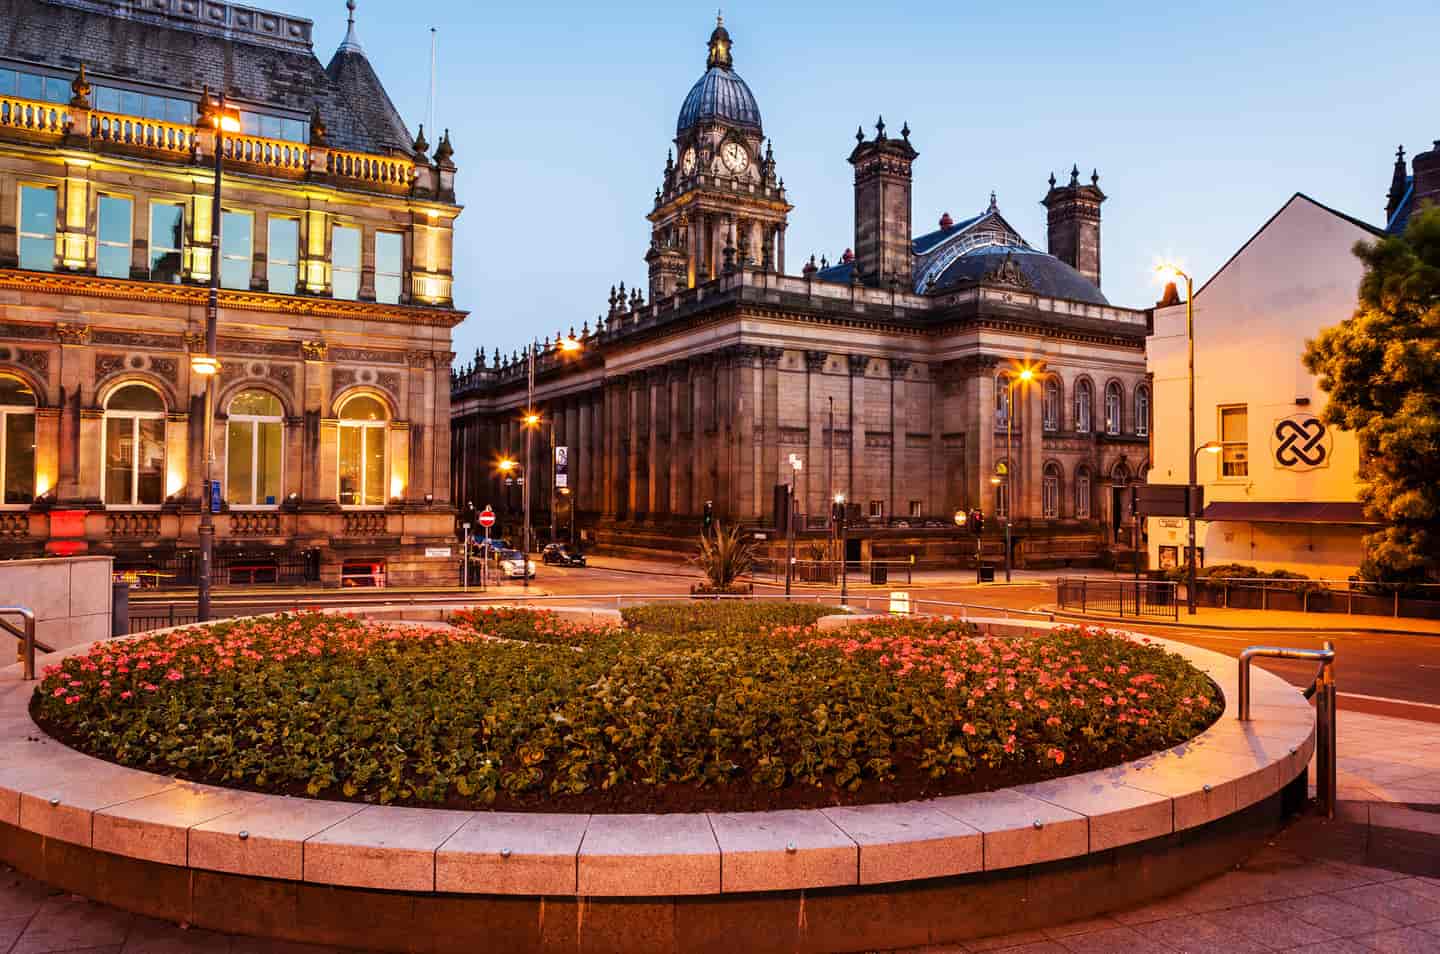 Student Accommodation in Leeds - Leeds Town Hall in the evening as viewed from Park Plaza